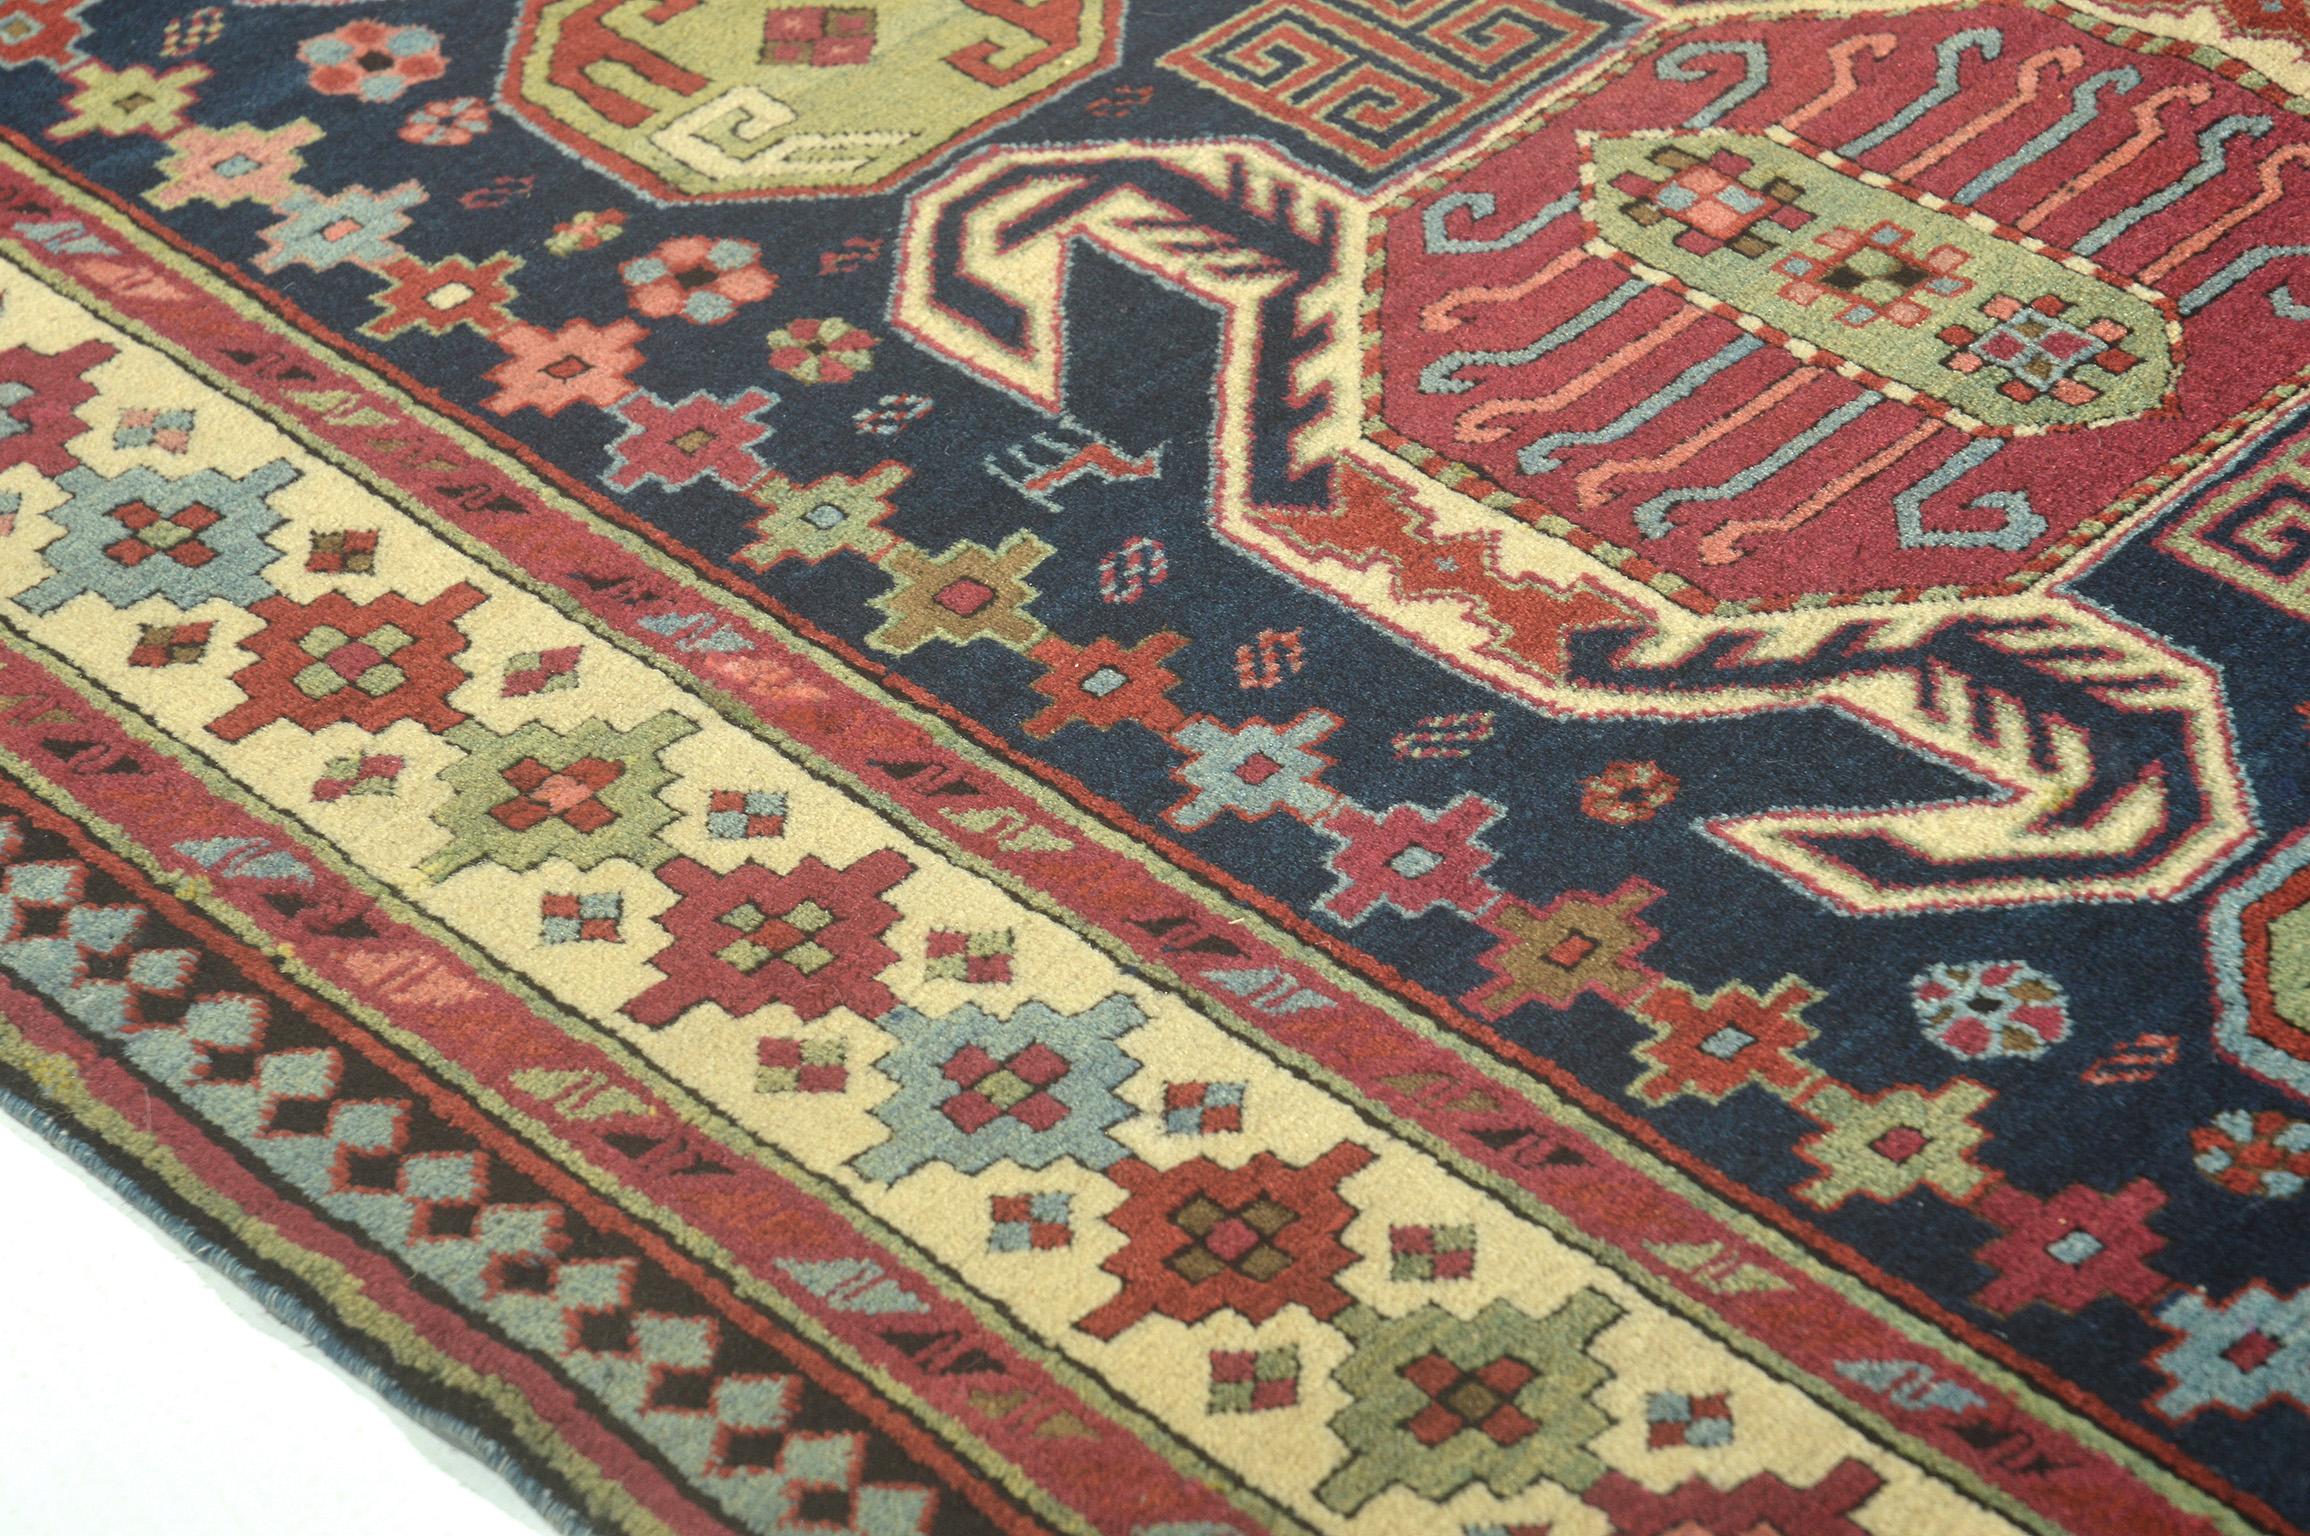 The Lenkoran rug is an antique hand woven from modern day Azerbaijan. Part of the ancient Persian Empire, the Caspian Sea coastal town of Lenkoran is known for its unique rug patterns and designs. Make your hallways a focal point of the home with